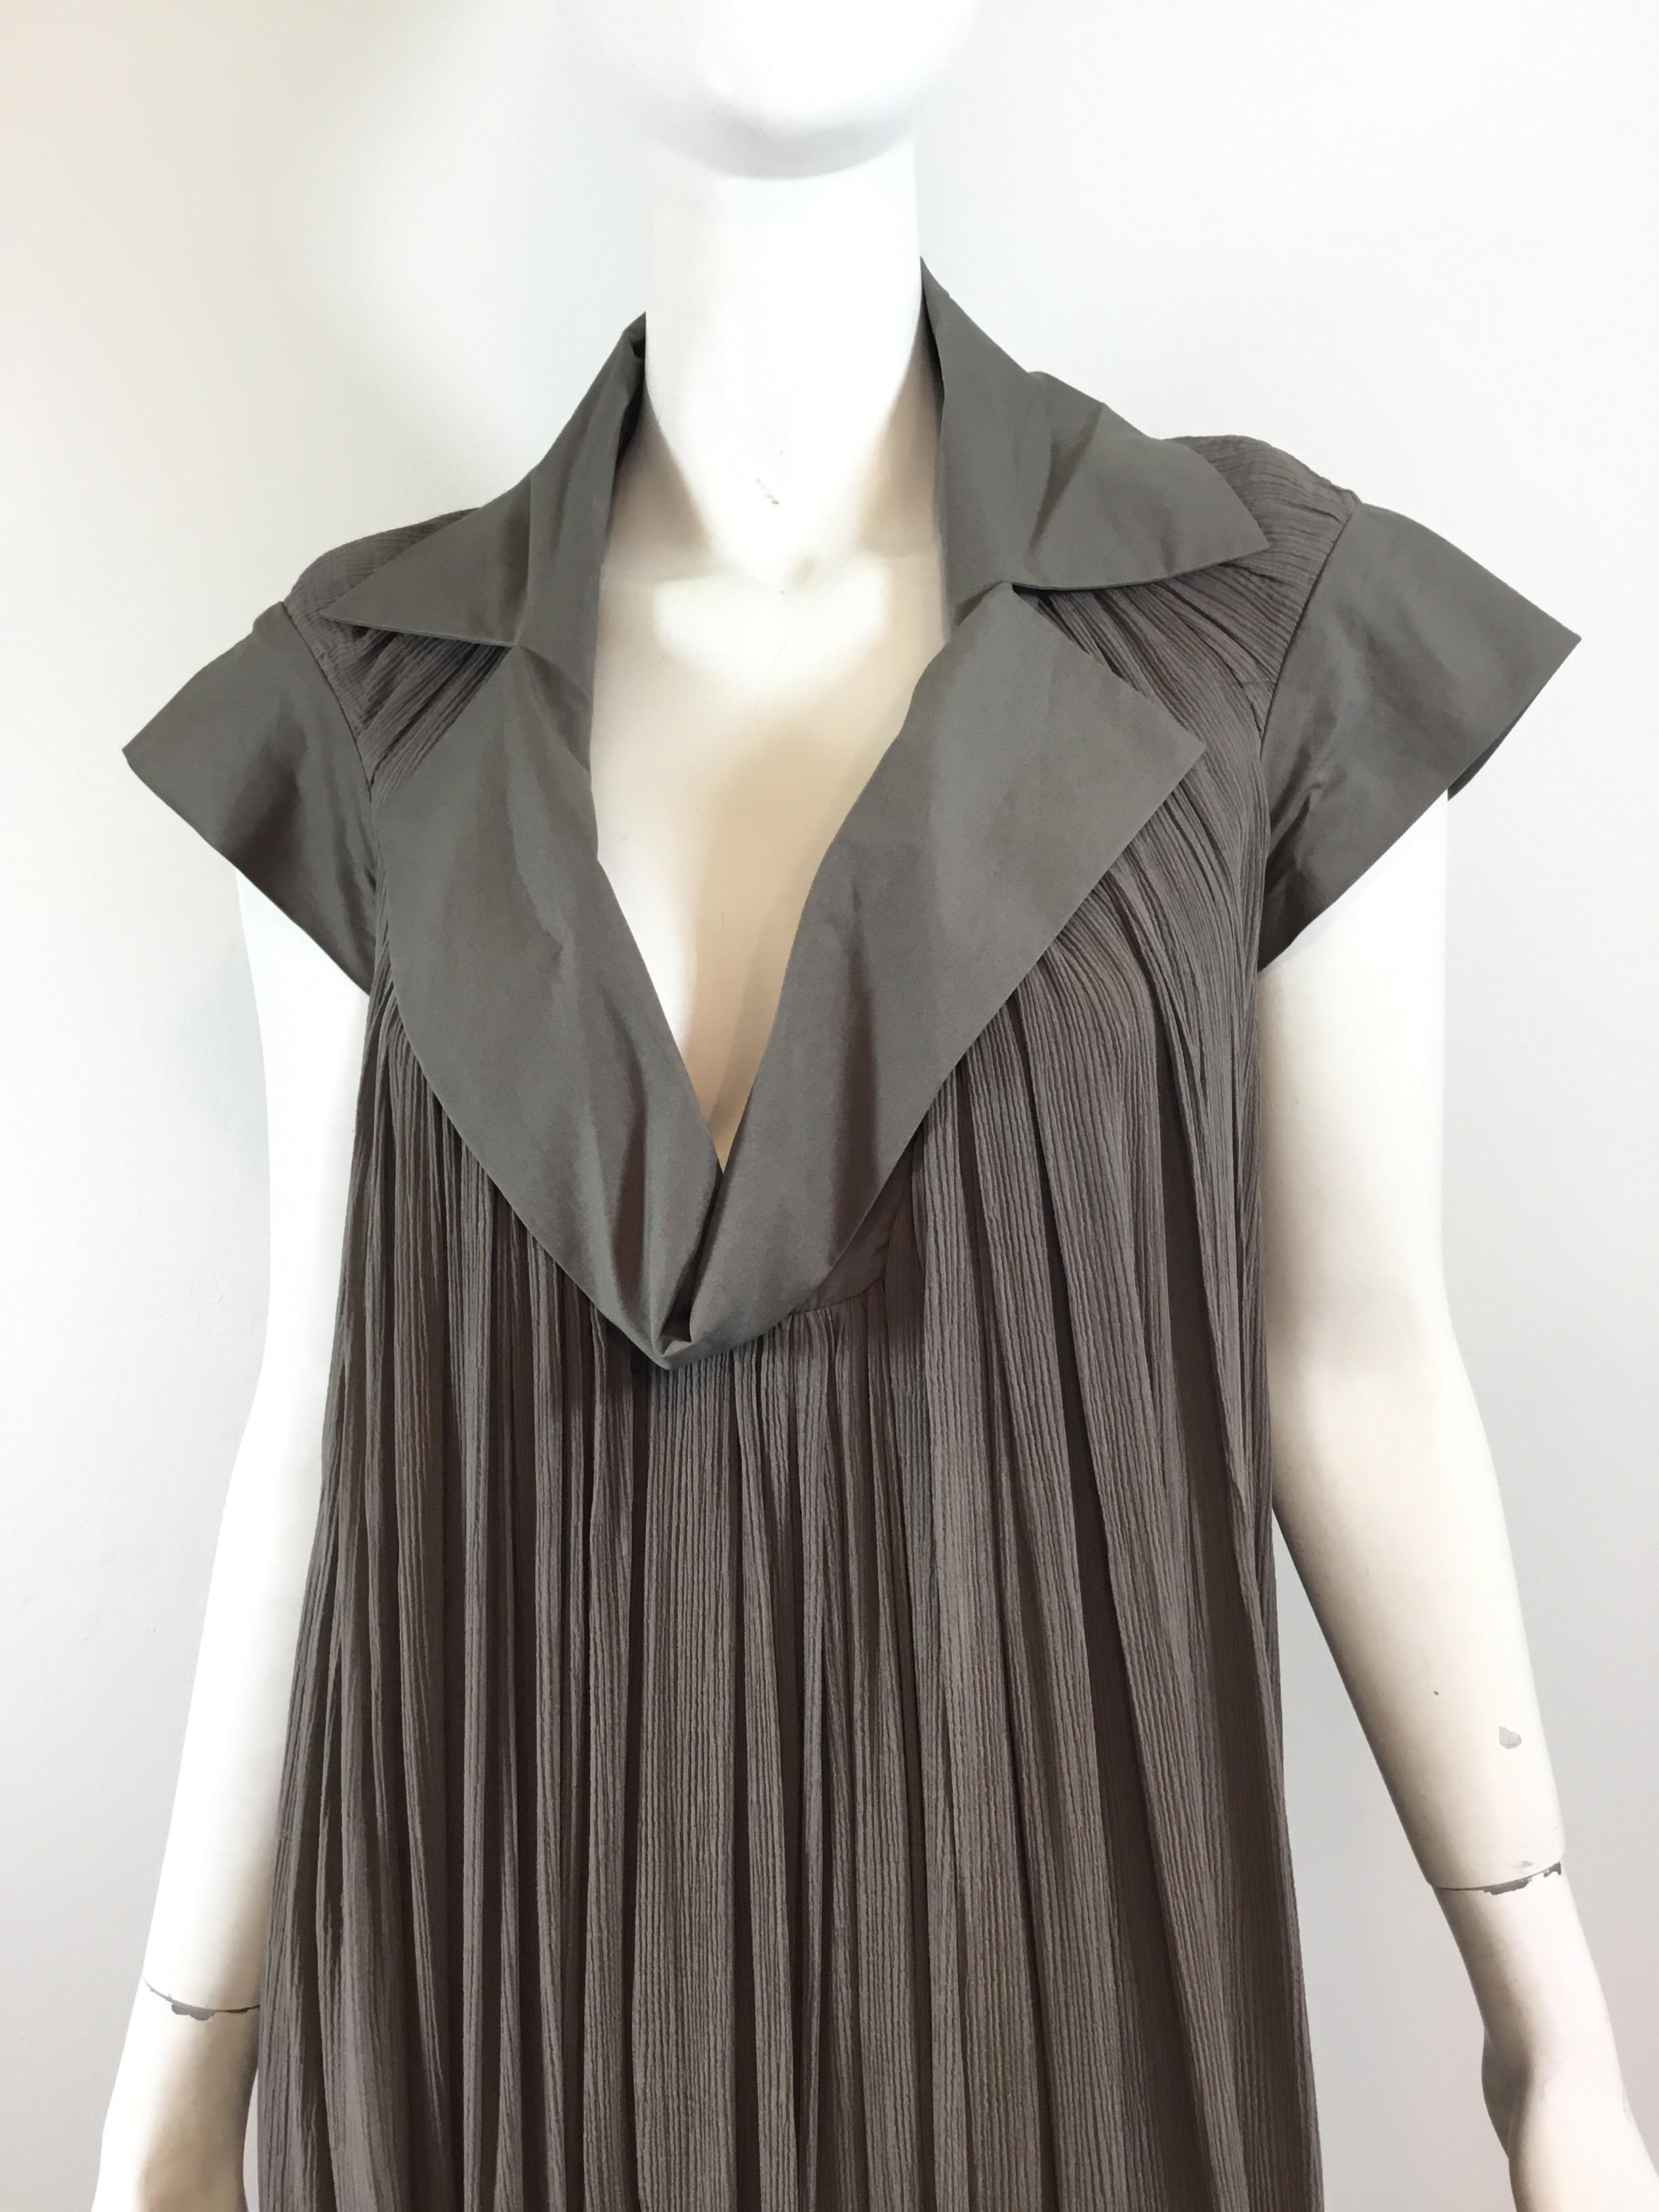 Bottega Veneta Taupe Cotton Dress with a chiffon overlay designed by creative director, Tomas Maier for Bottega Veneta’s 2008 Spring/Summer collection. Dress has a concealed back zipper fastening, labeled size 38, composed of 69% cotton and 31%